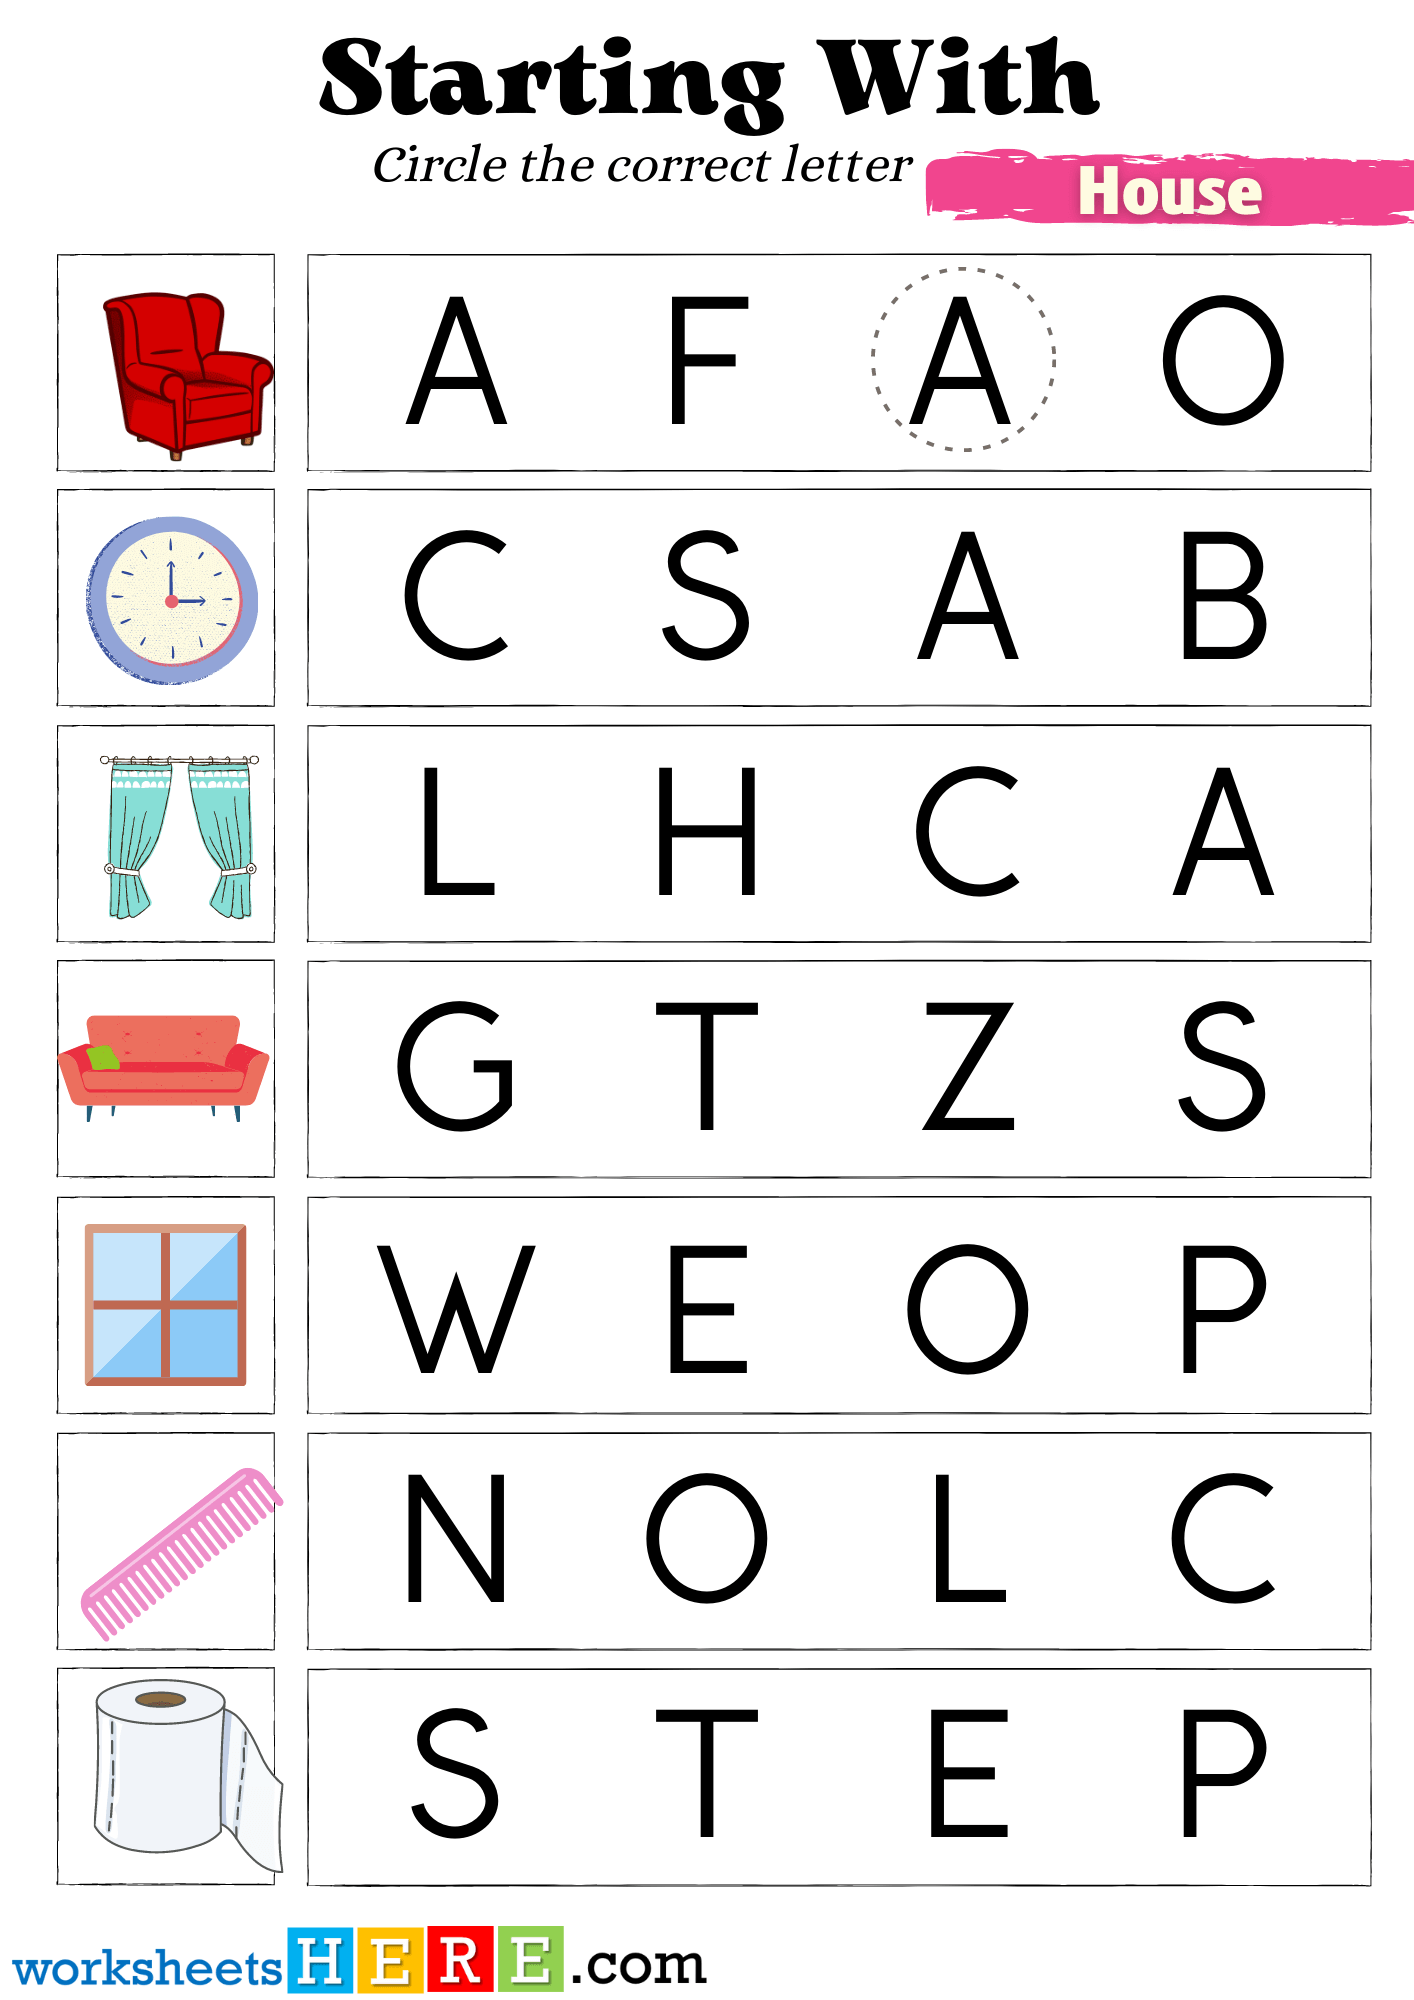 Find The House That Starts Beginning With The Correct Letter Pdf Worksheet